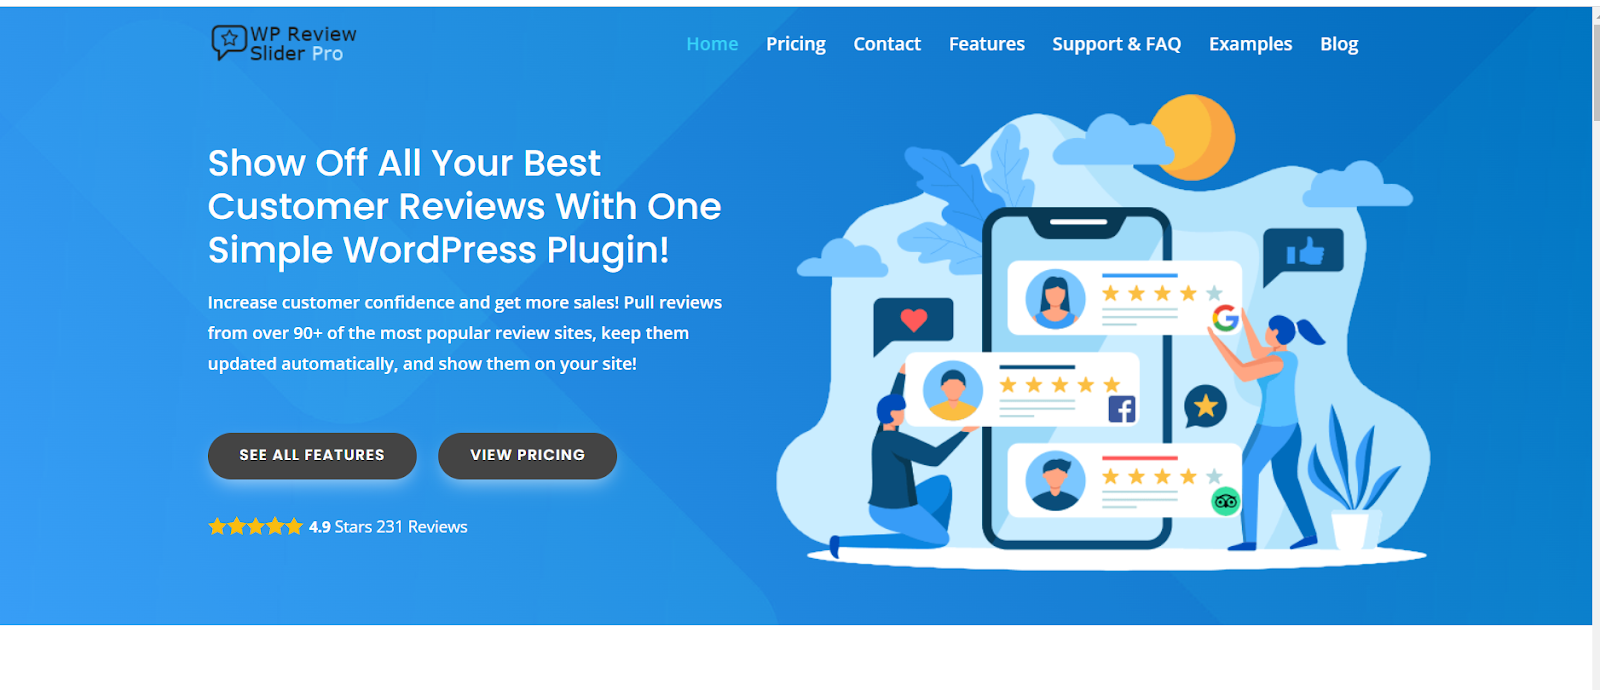 The WP Review Slider Pro plugin homepage